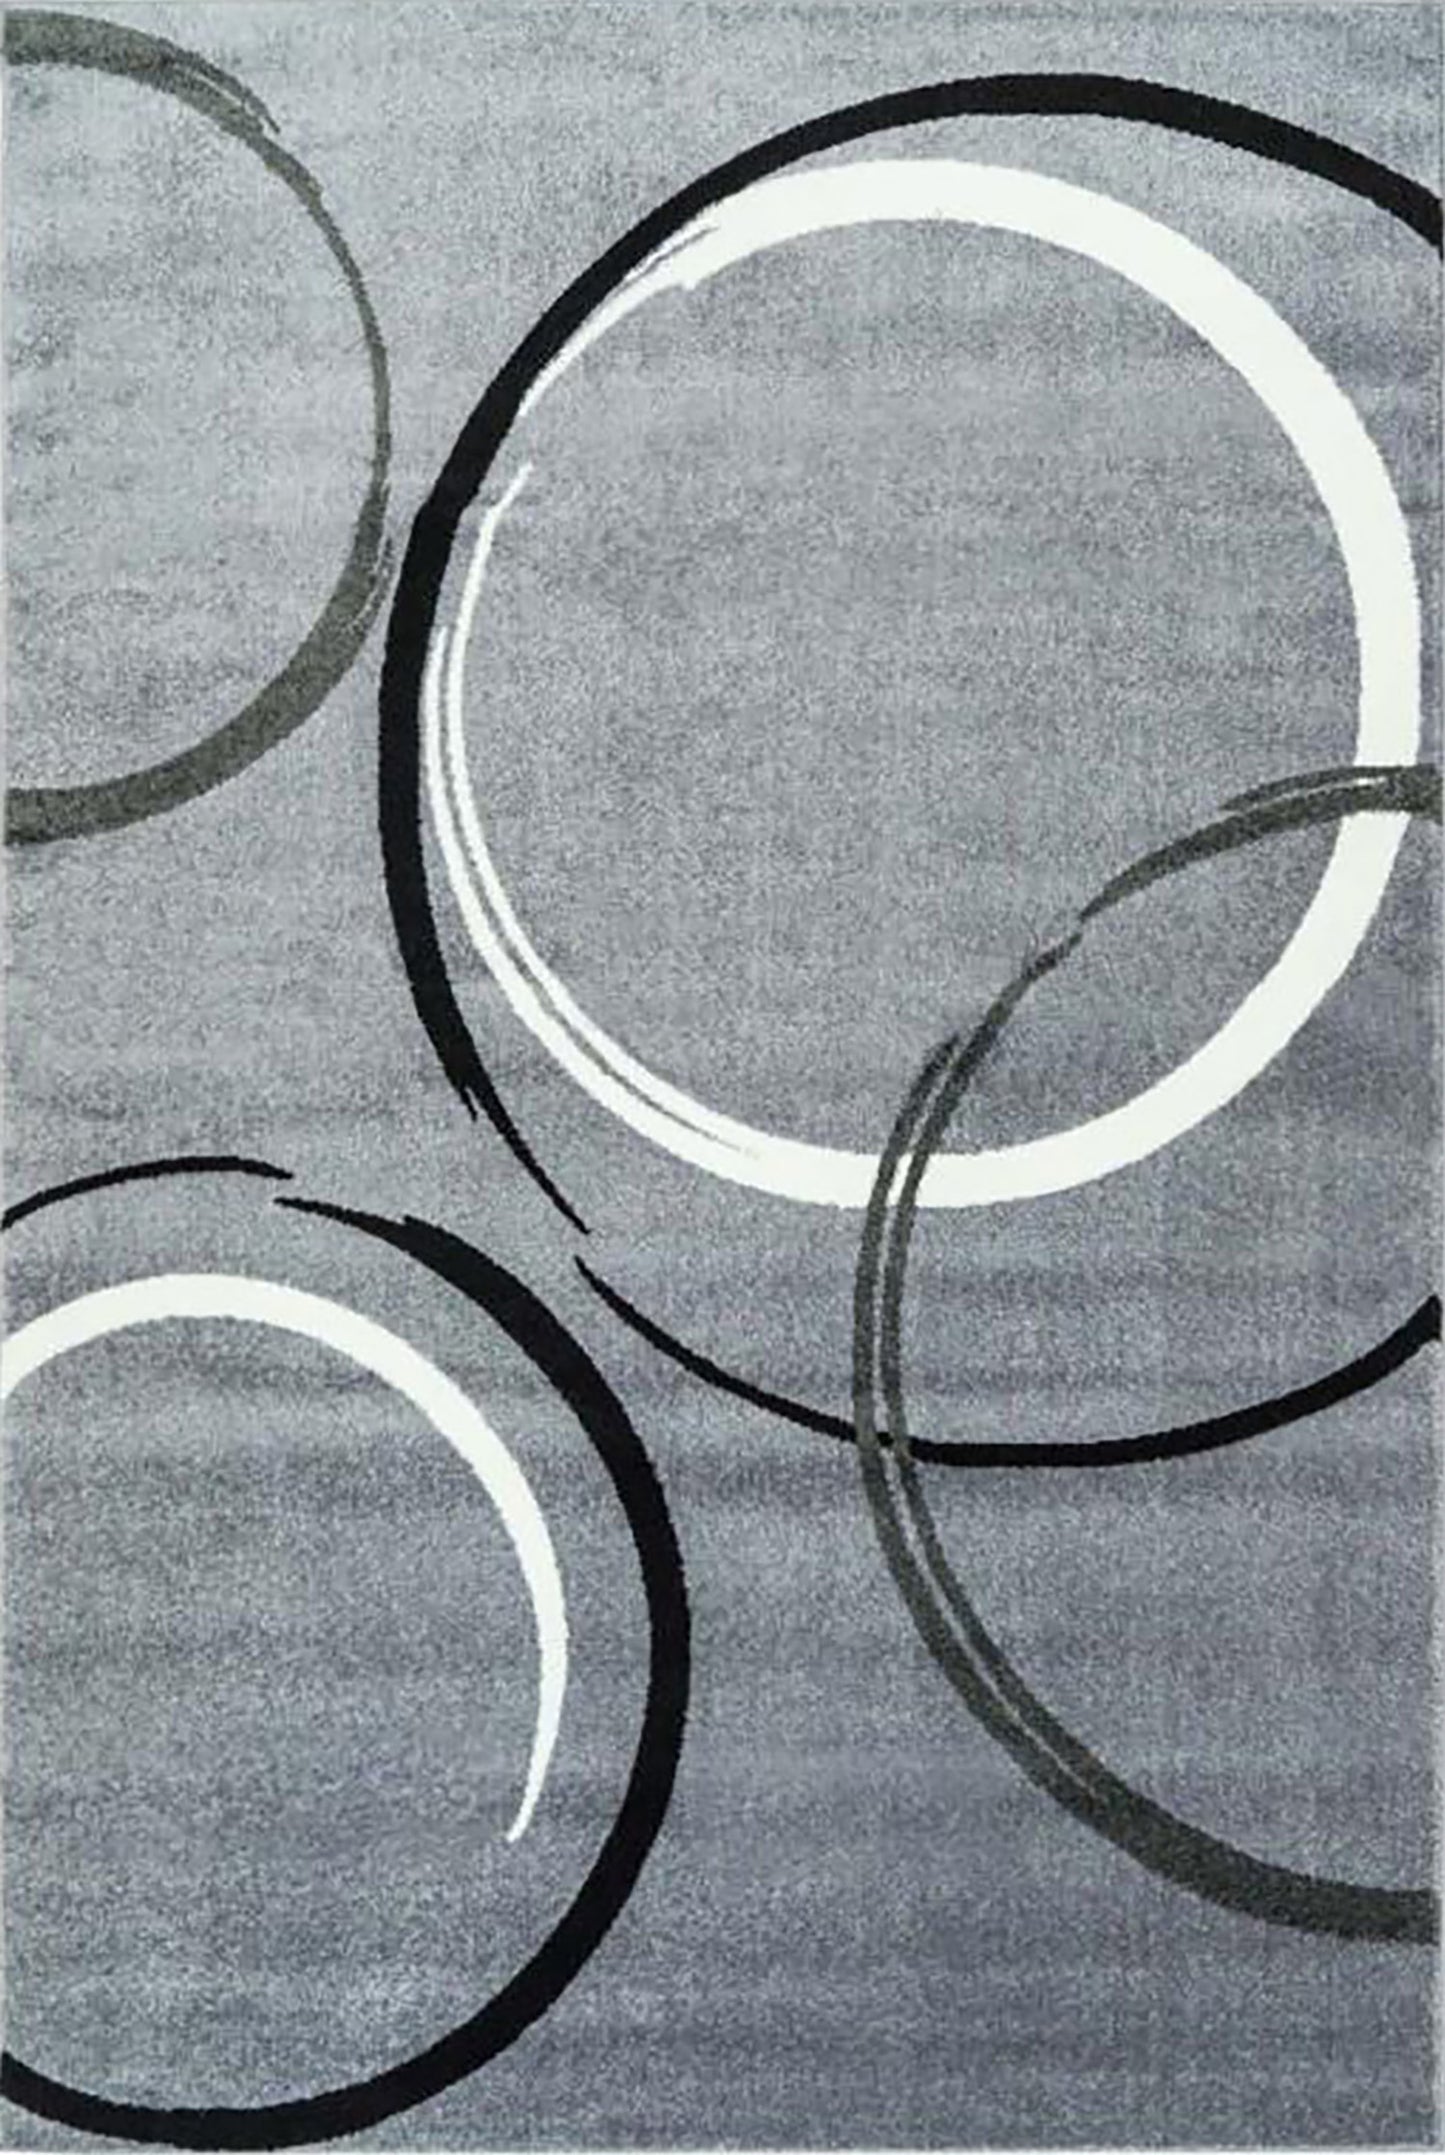 bravo gray abstract area rug 4x6, 4x5 ft Small Carpet, Home Office, Living Room, Bedroom